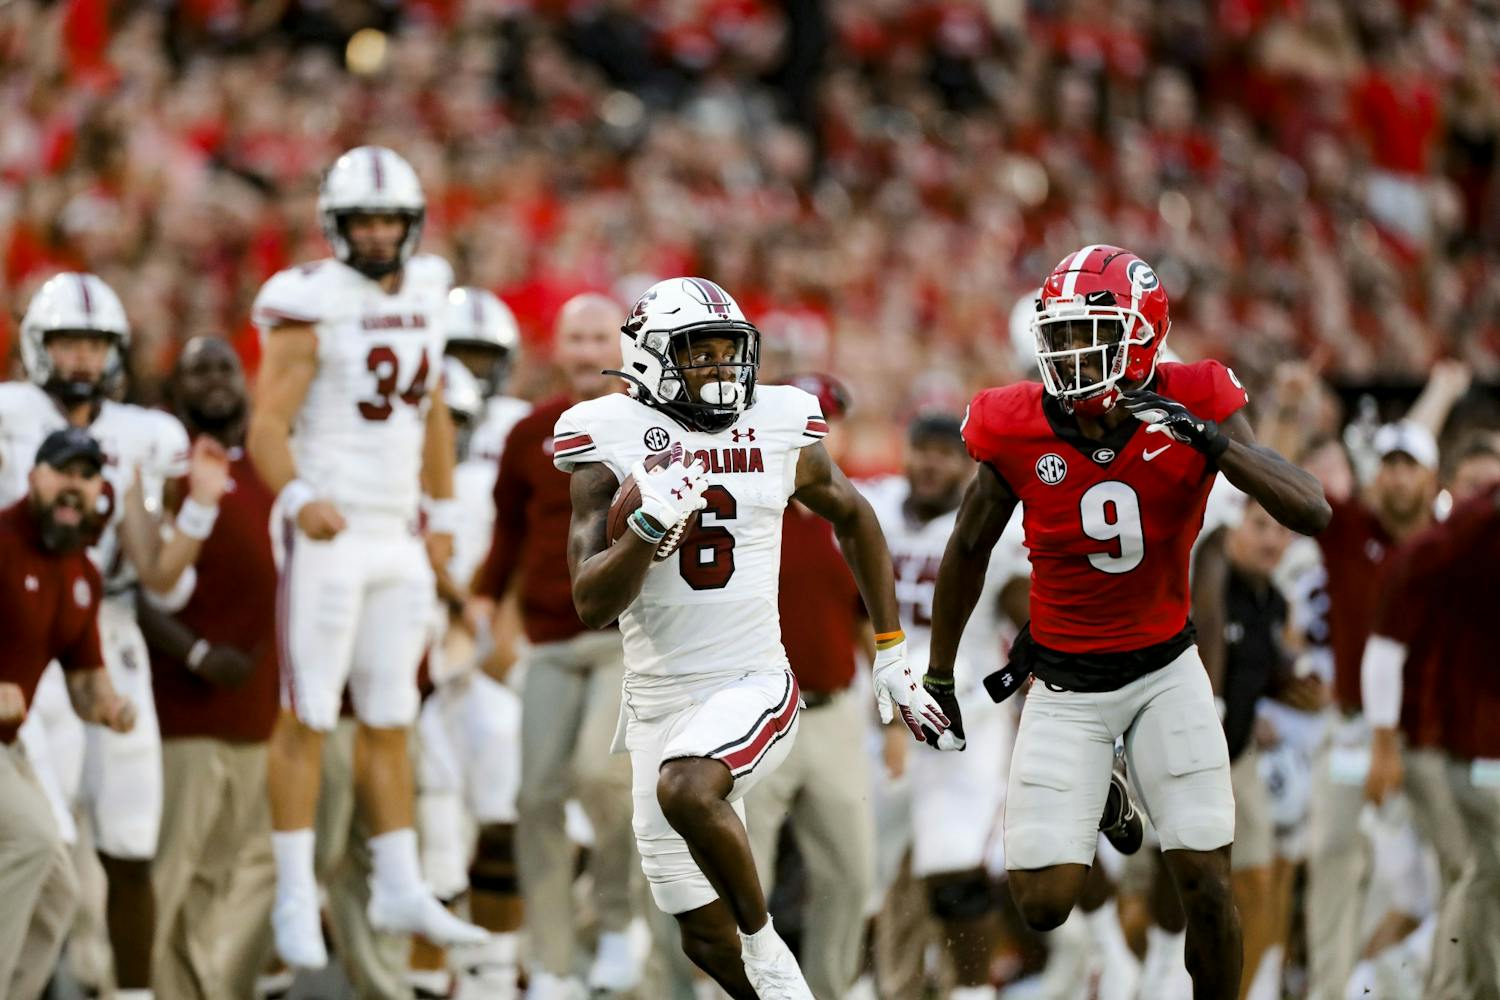 Senior wide receiver Josh Vann runs a breakout play in the first quarter of South Carolina's game against Georgia on Sept. 18, 2021.